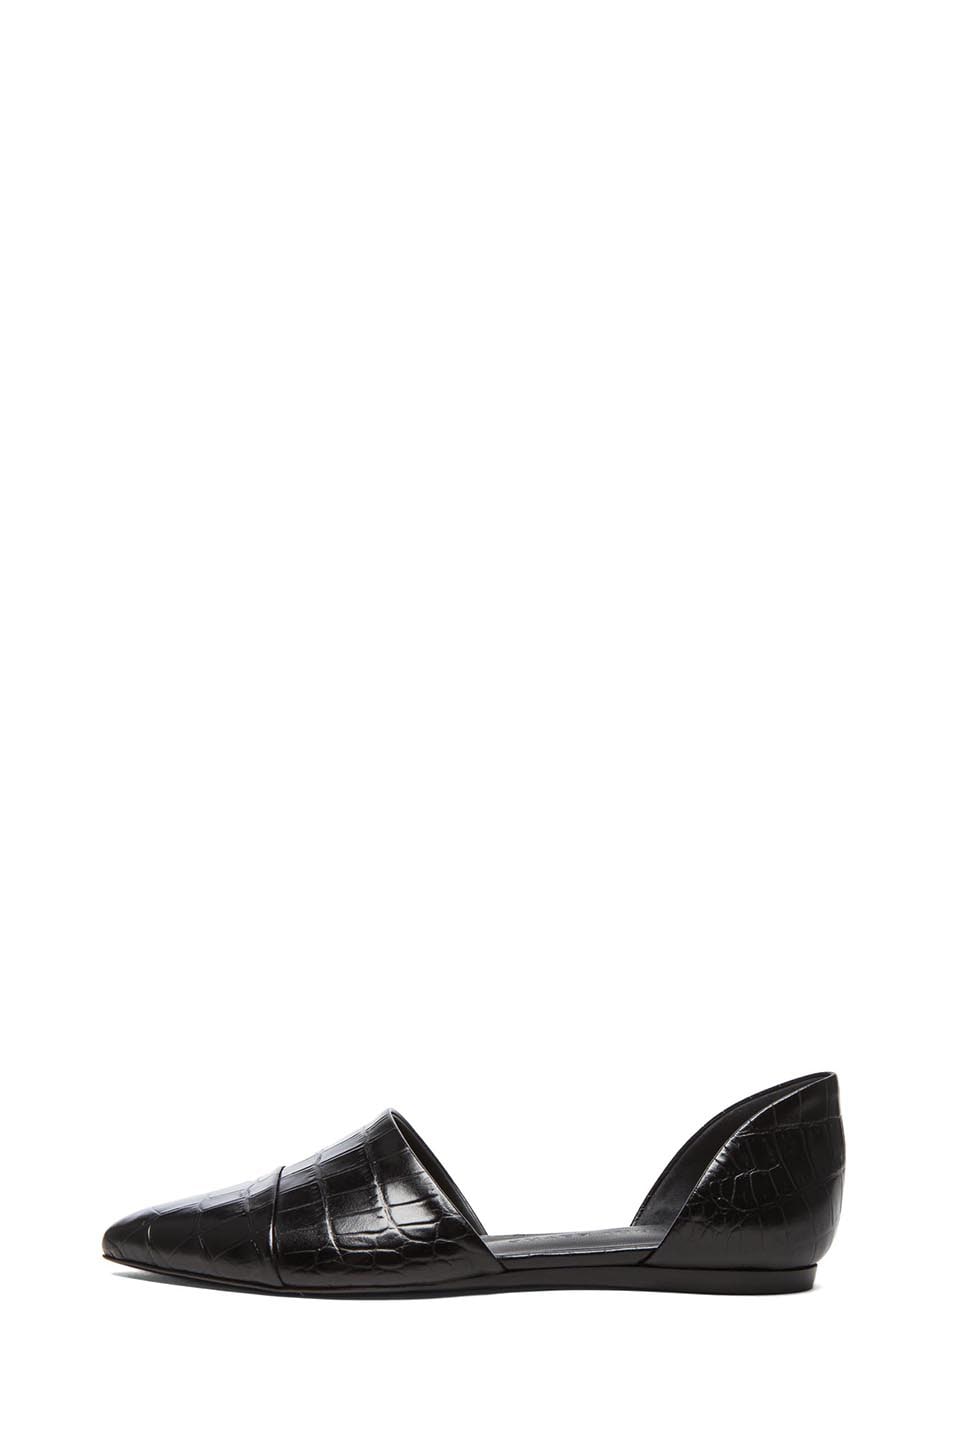 Image 1 of Jenni Kayne D'Orsay Croc Embossed Leather Flats in Black